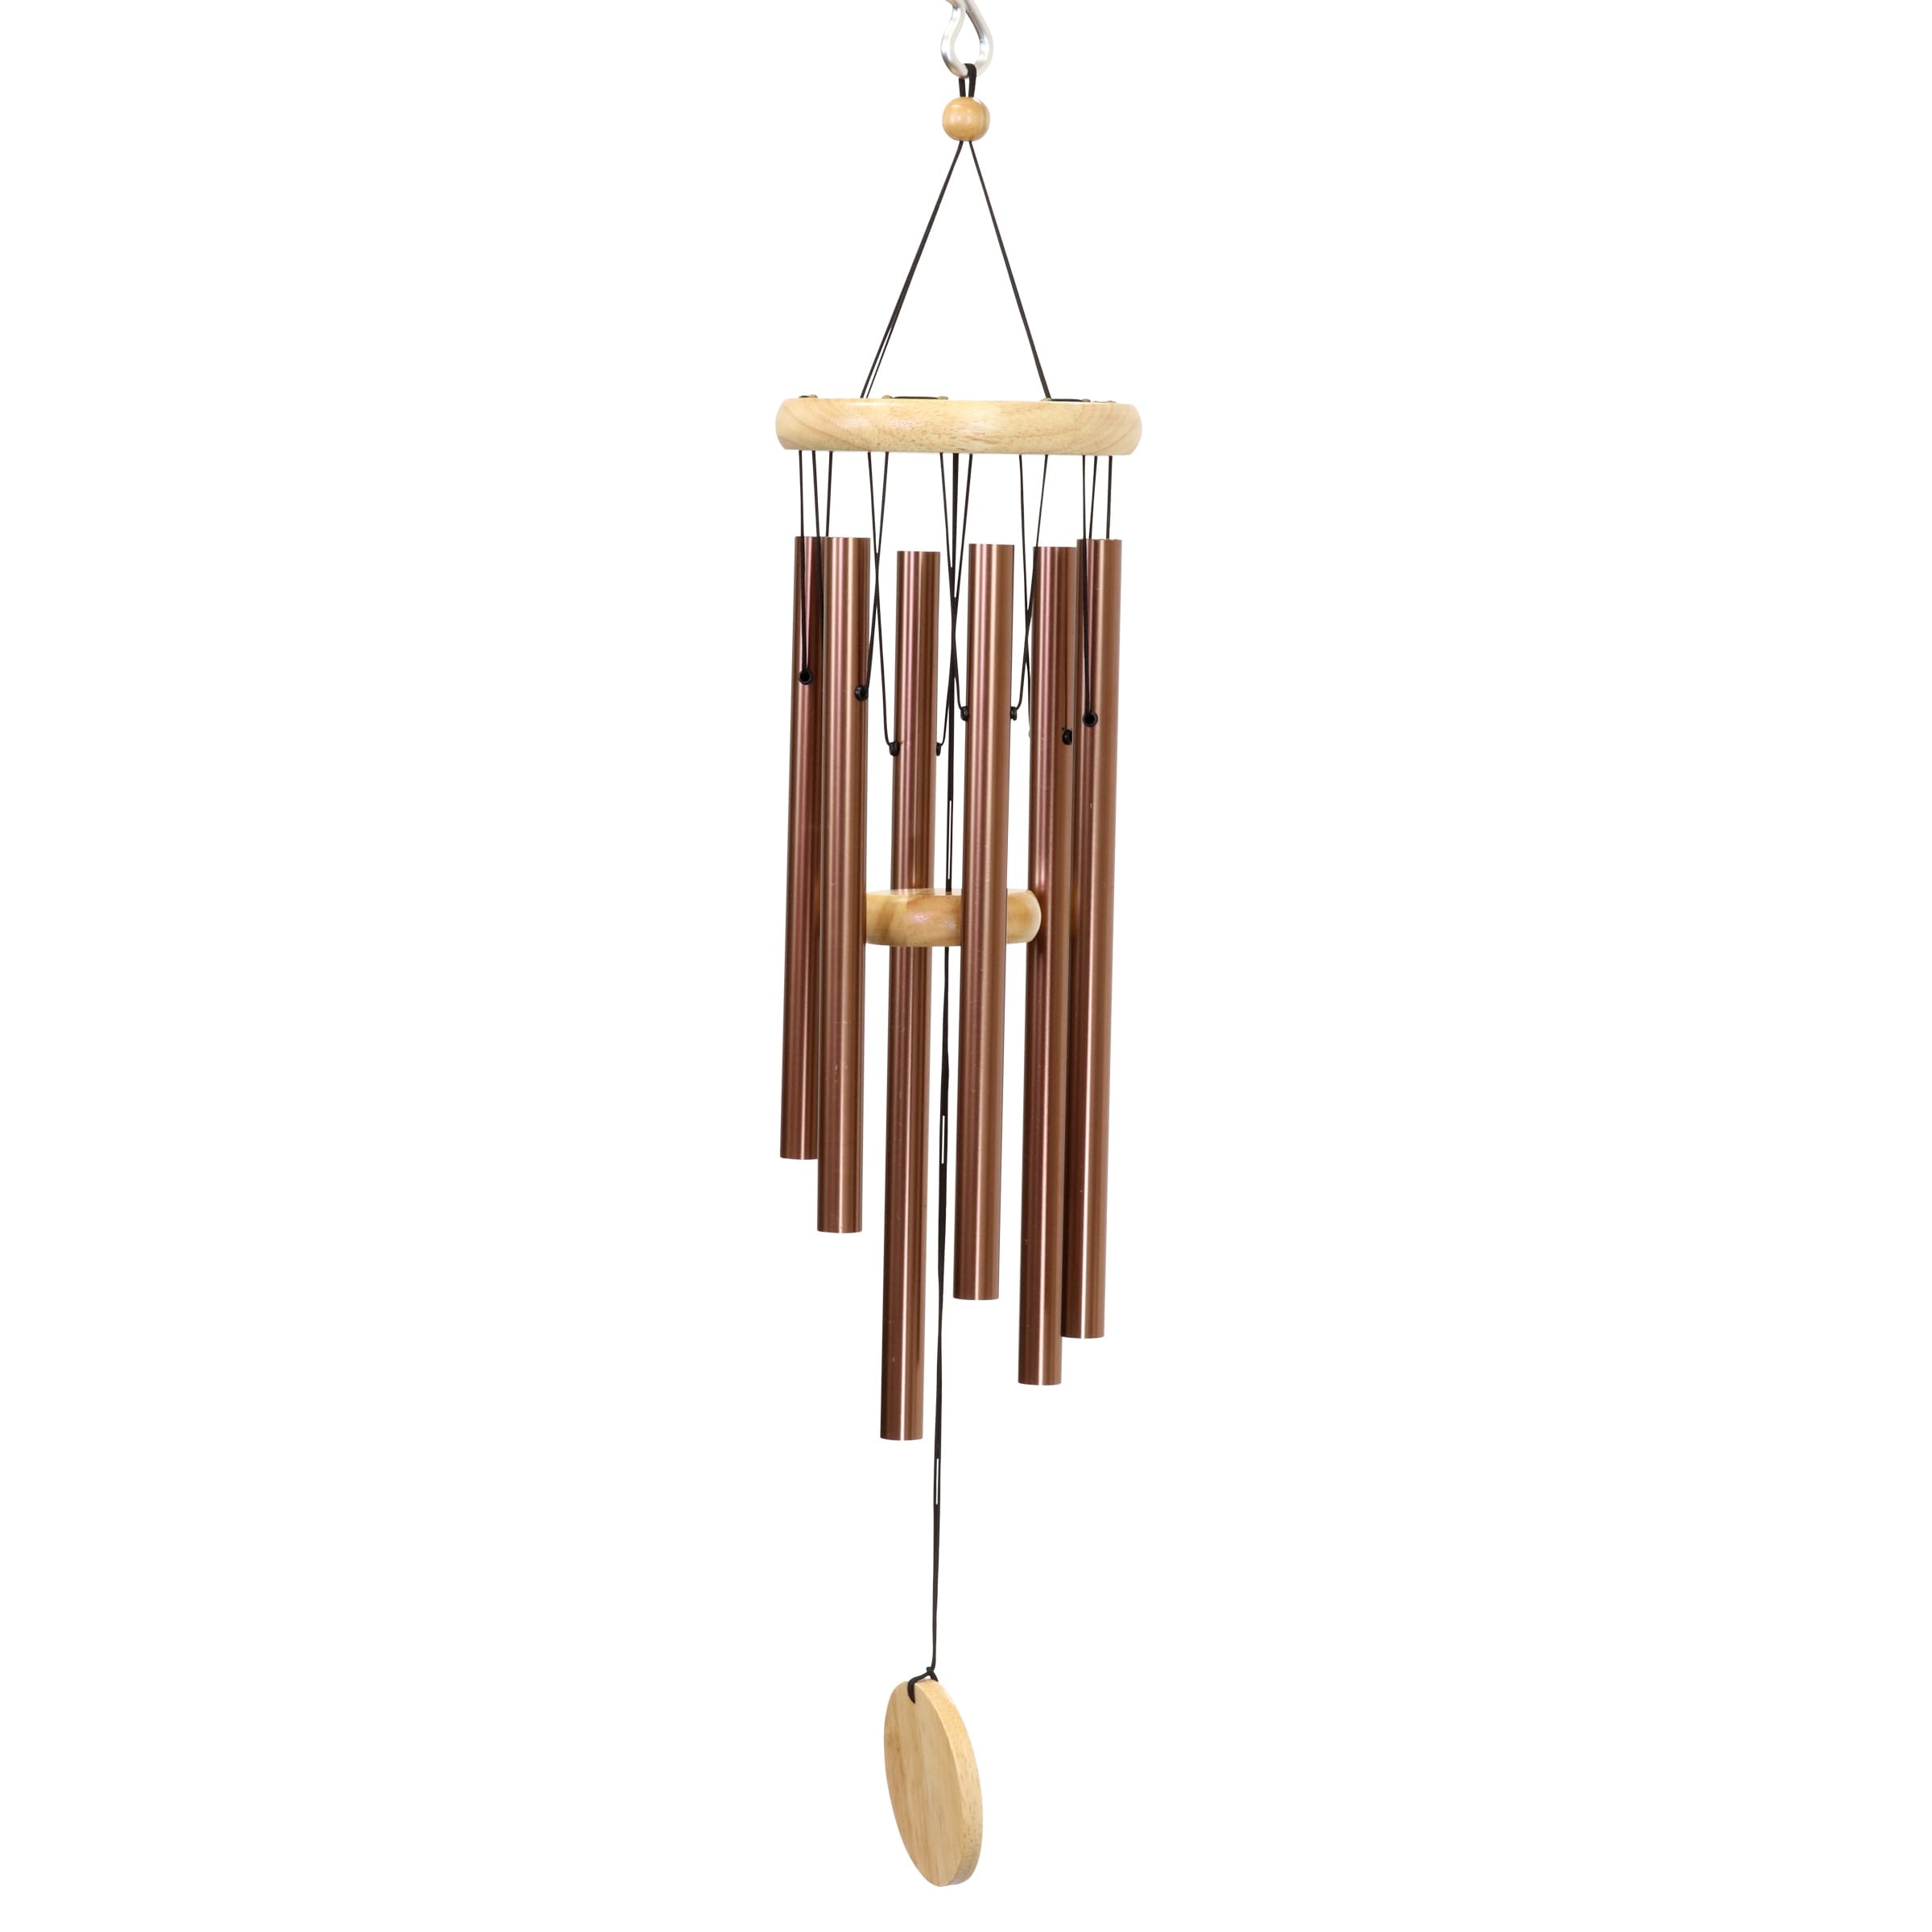 Brand New in Original Box! Exhart 30-in Natural Metal Angel Chime Wind Chime 